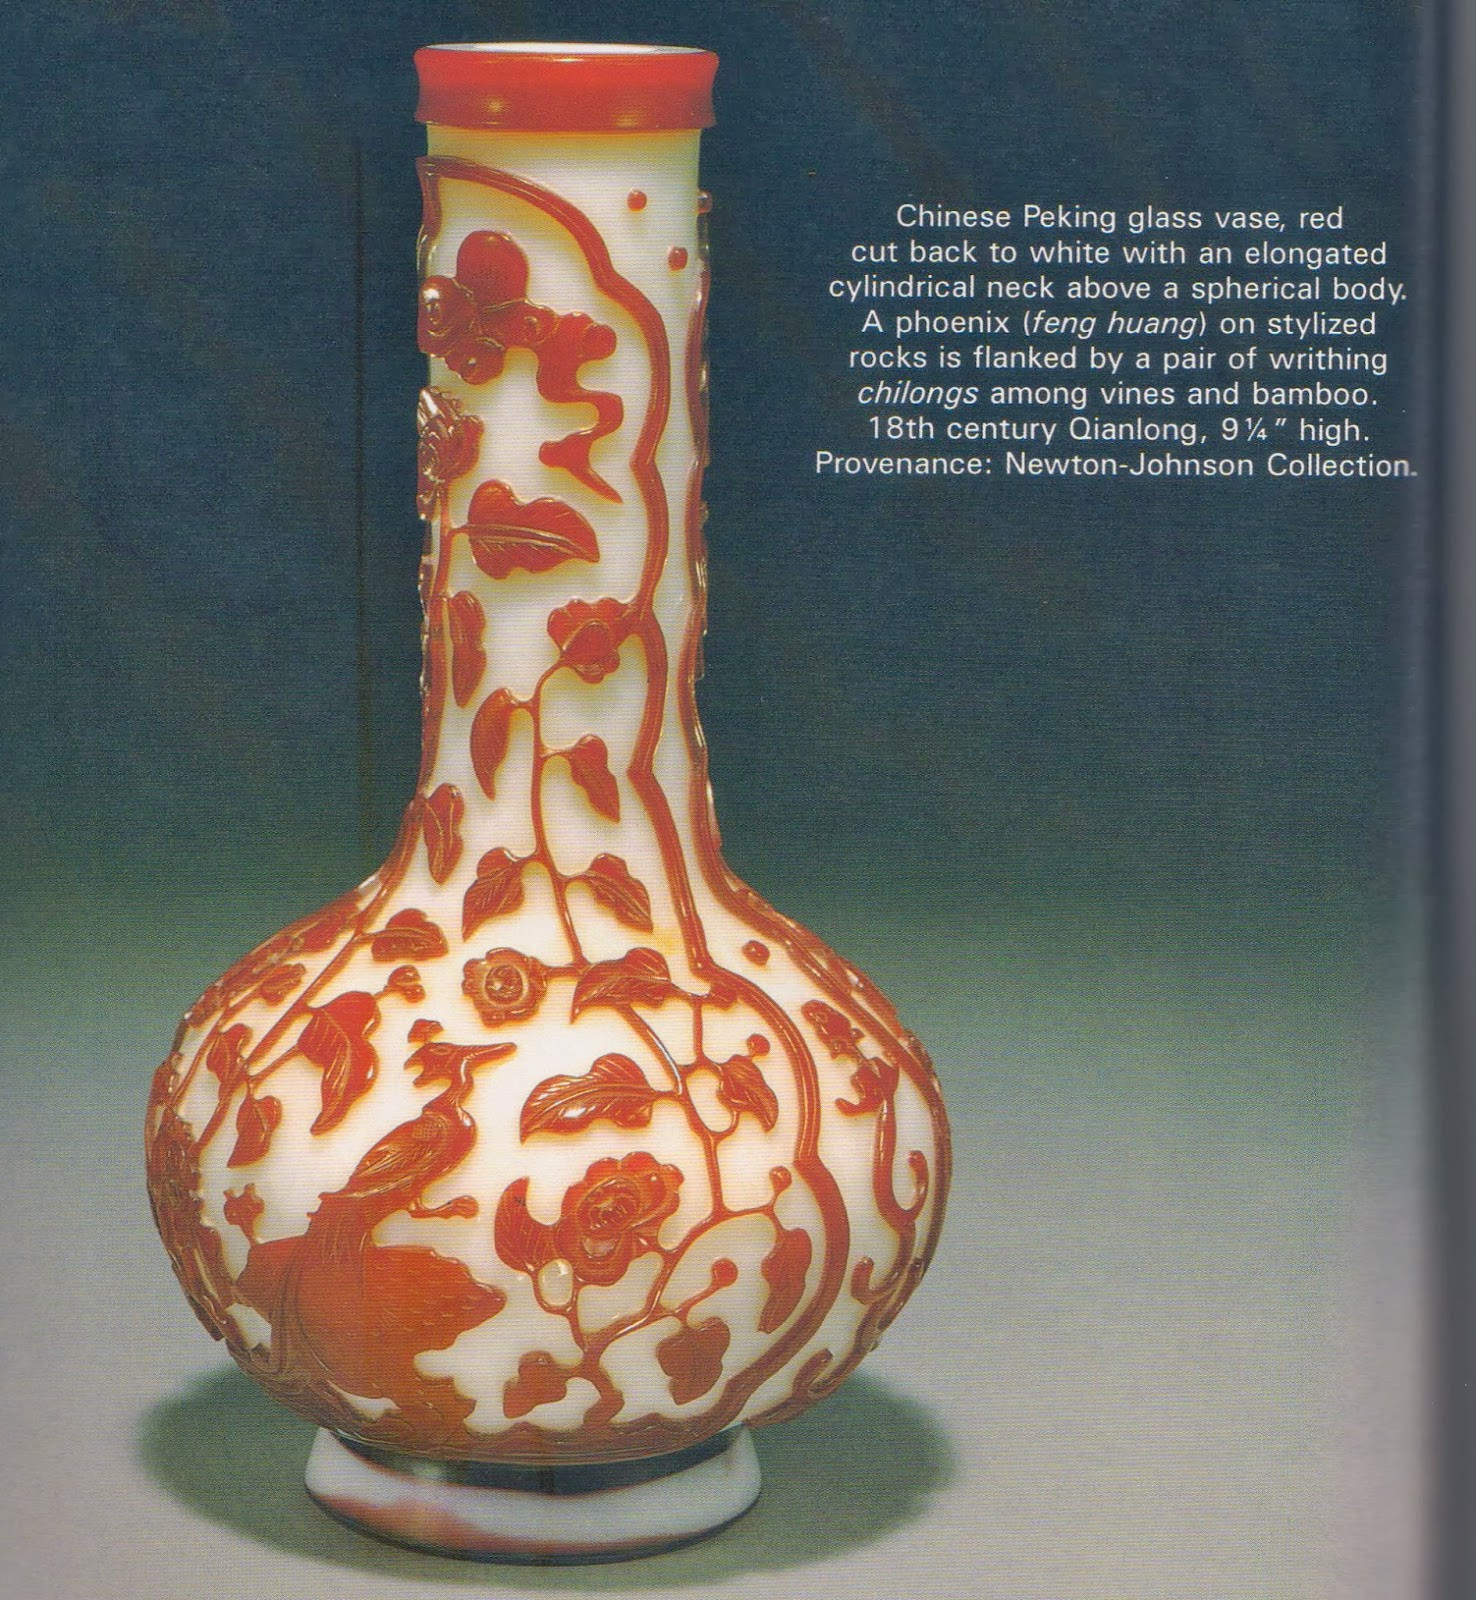 30 Lovable Peking Glass Vase for Sale 2024 free download peking glass vase for sale of emperors antique a chinese peking glass vase red cut back to white with compiled from arts of asia sept oct 2000